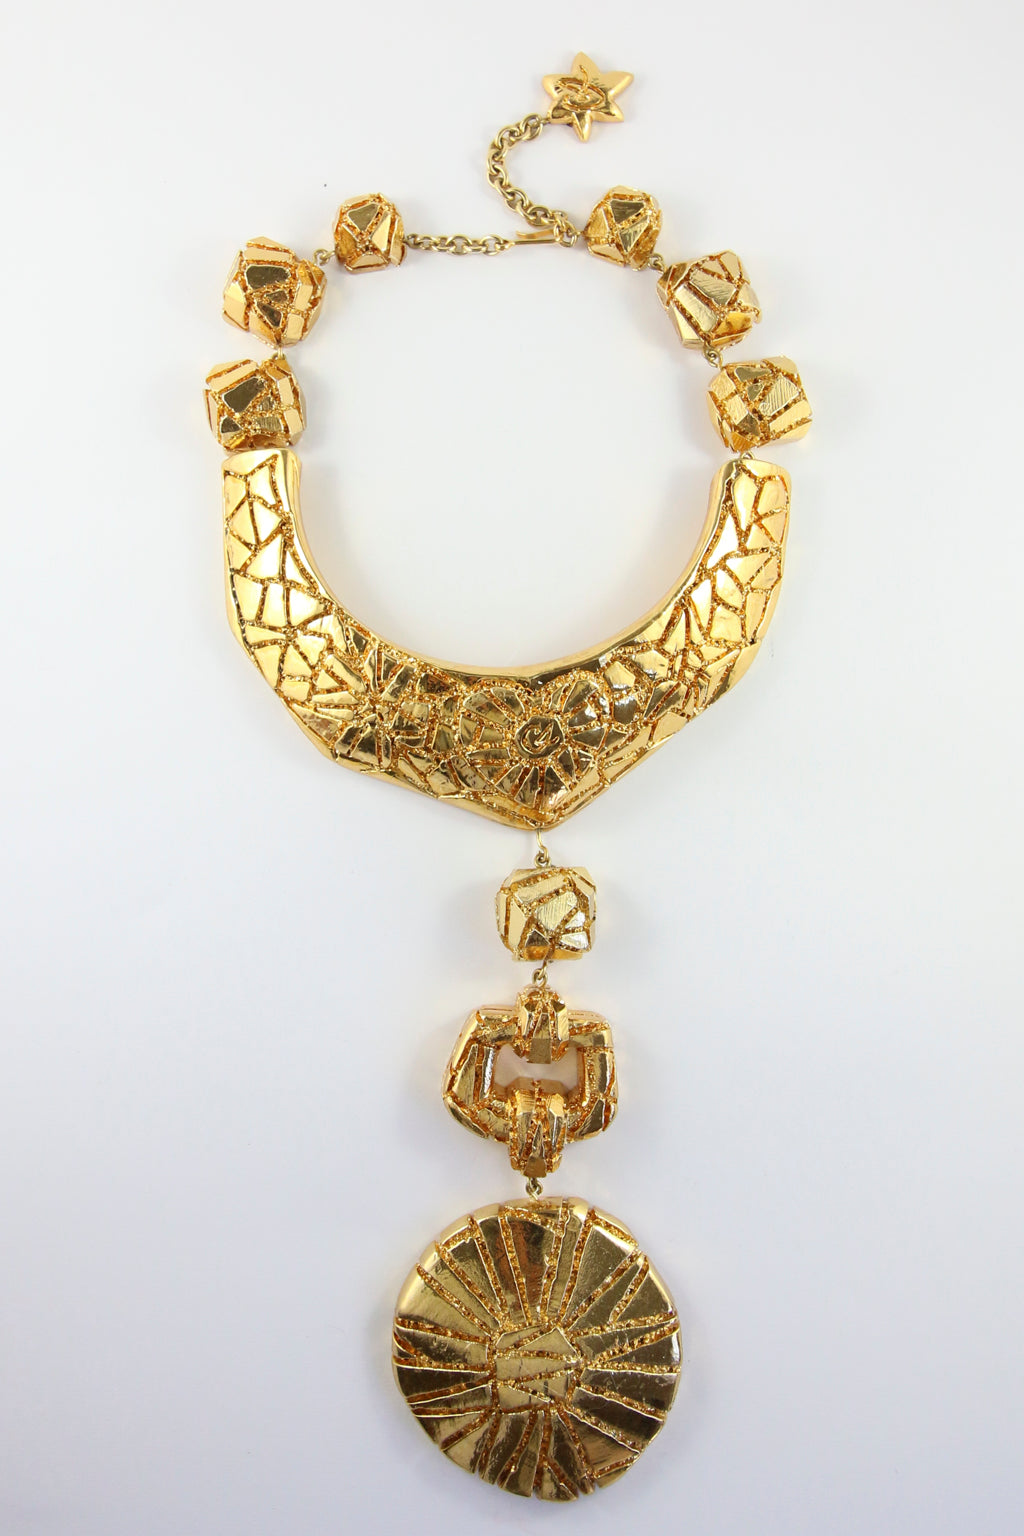 Unique Vintage Signed 'Christian Lacroix' Gold Plated Runway Piece with Carved Patterns